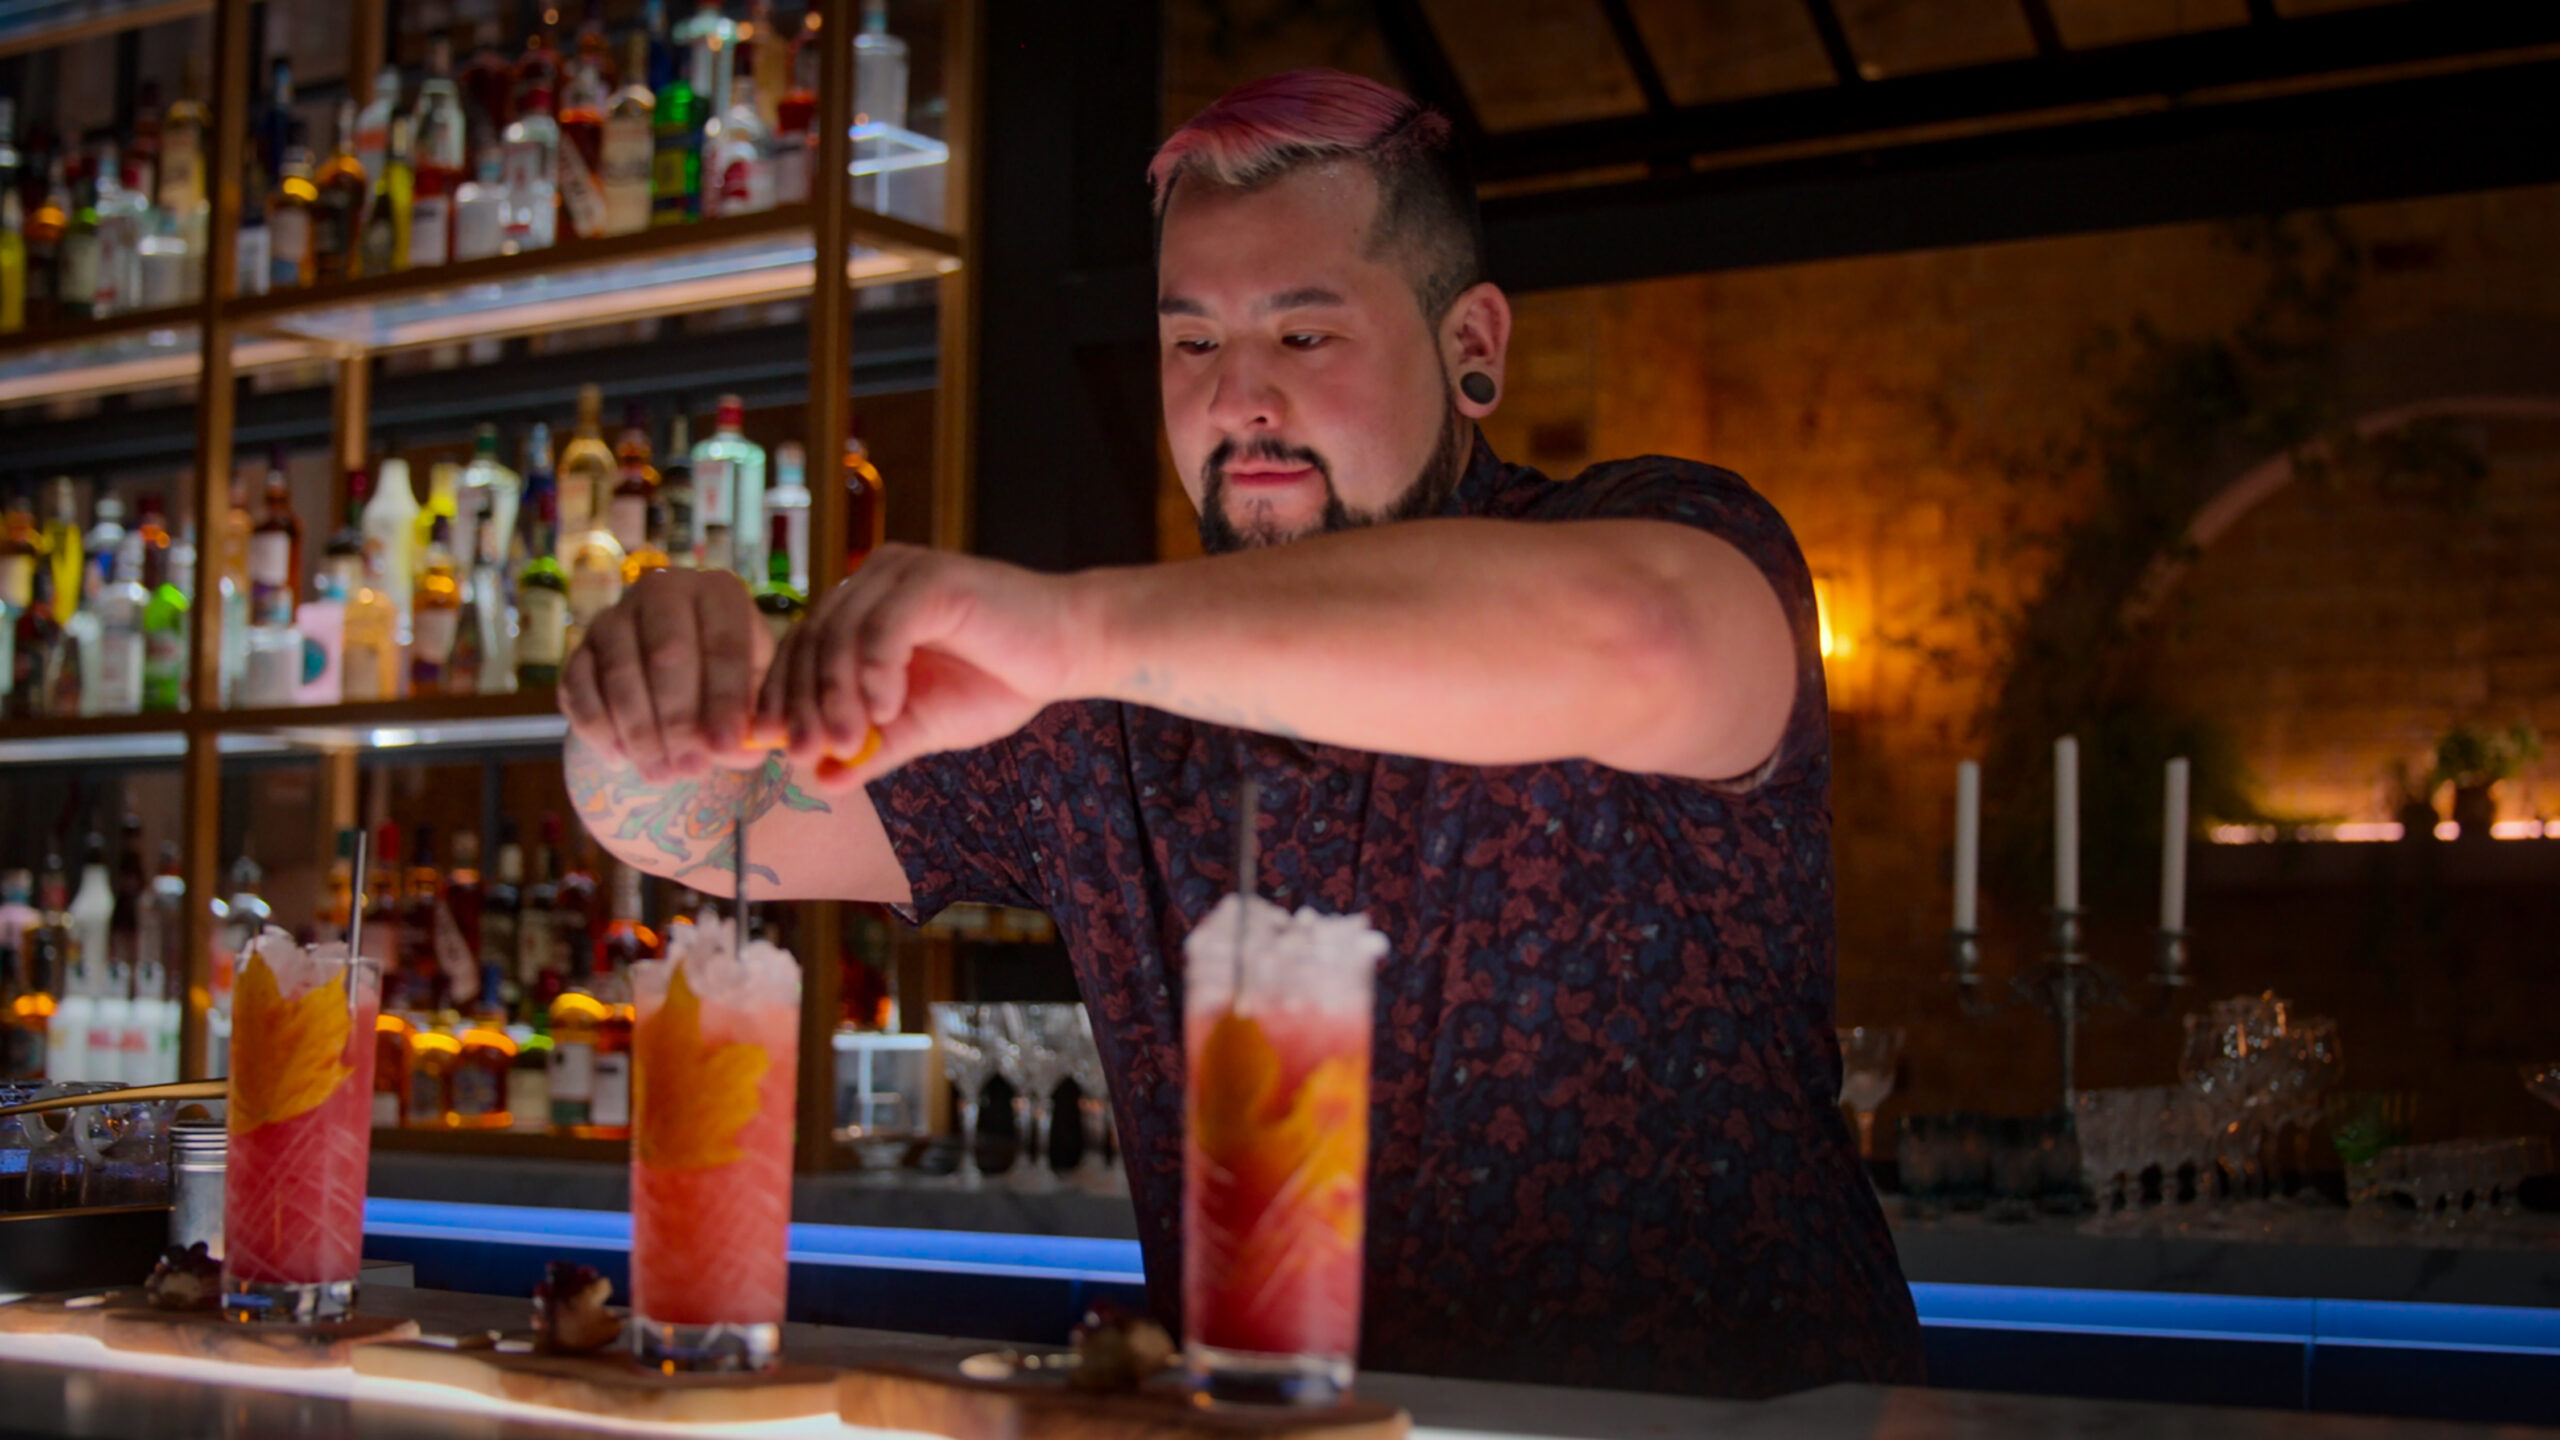 SF bartender stars in new Netflix mixology competition debuting this month